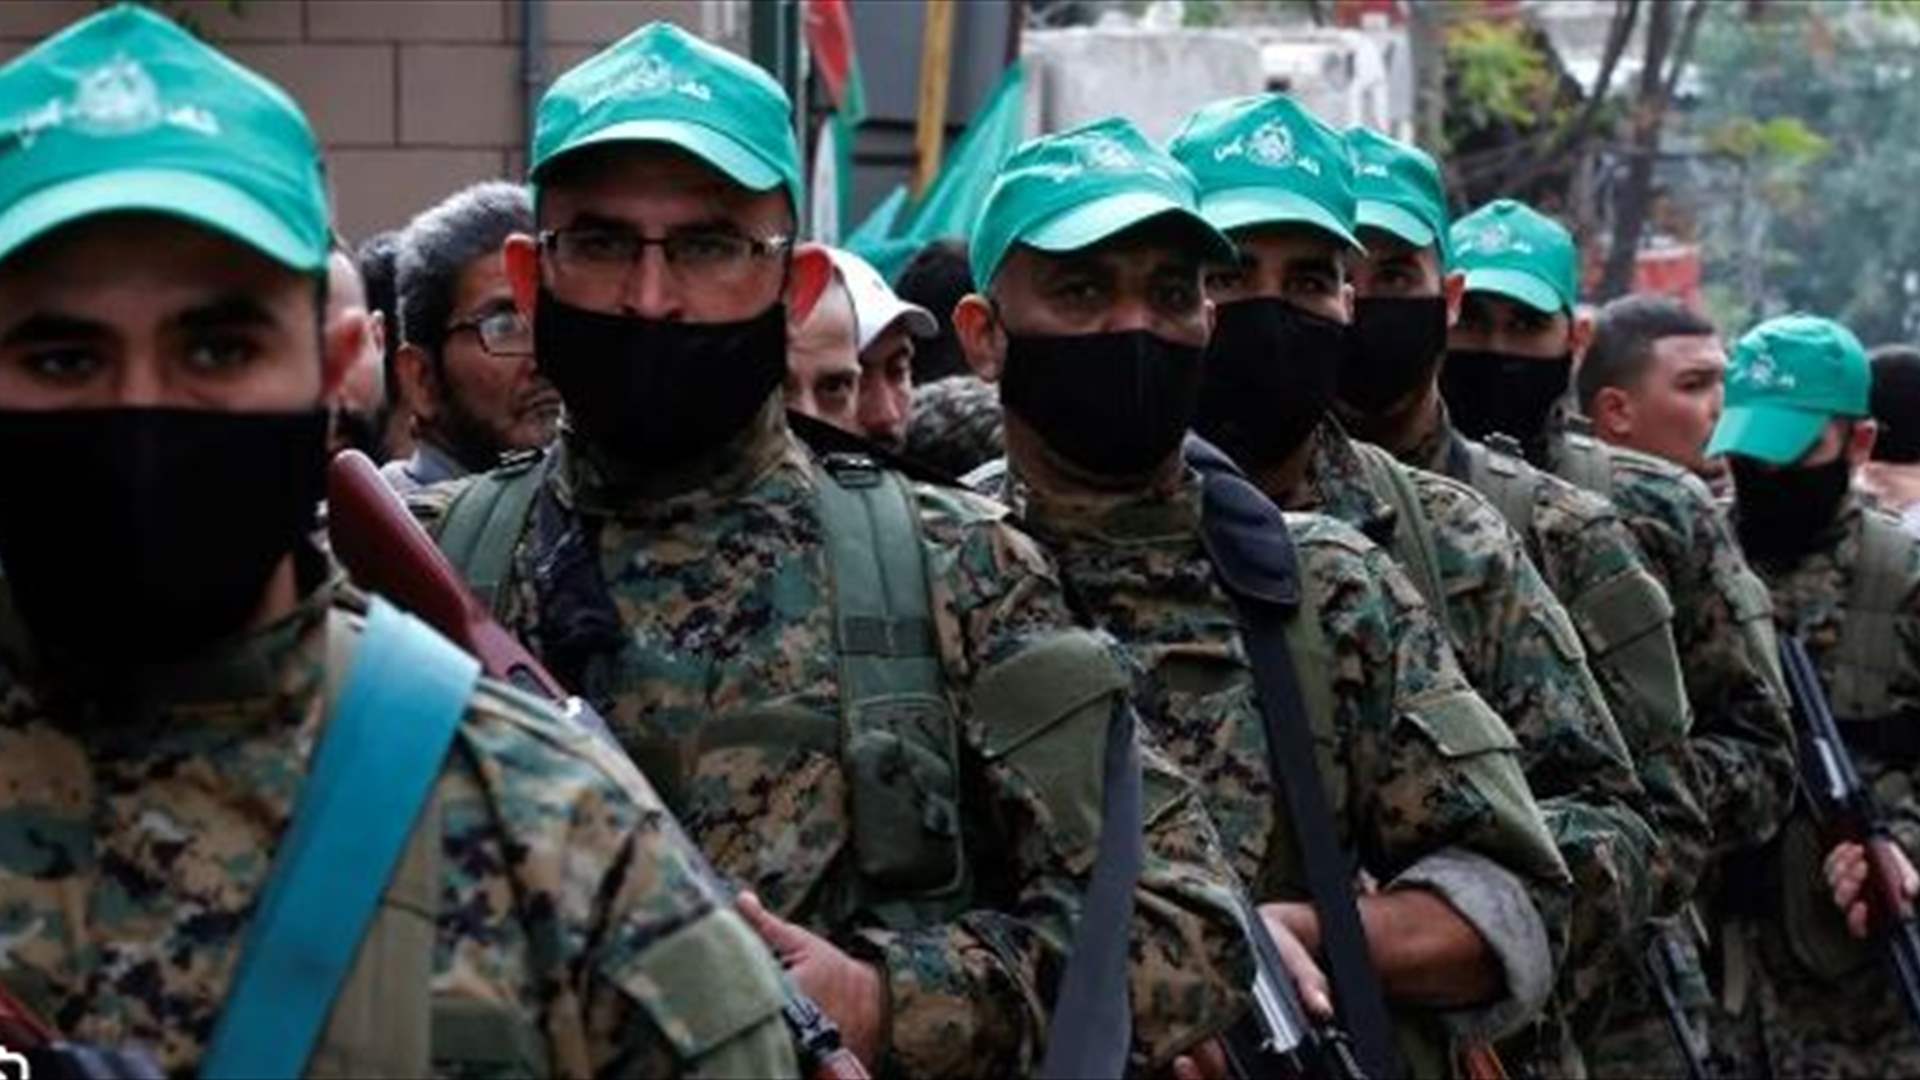 Hamas vanguard in Lebanon seeks to expand influence in camps